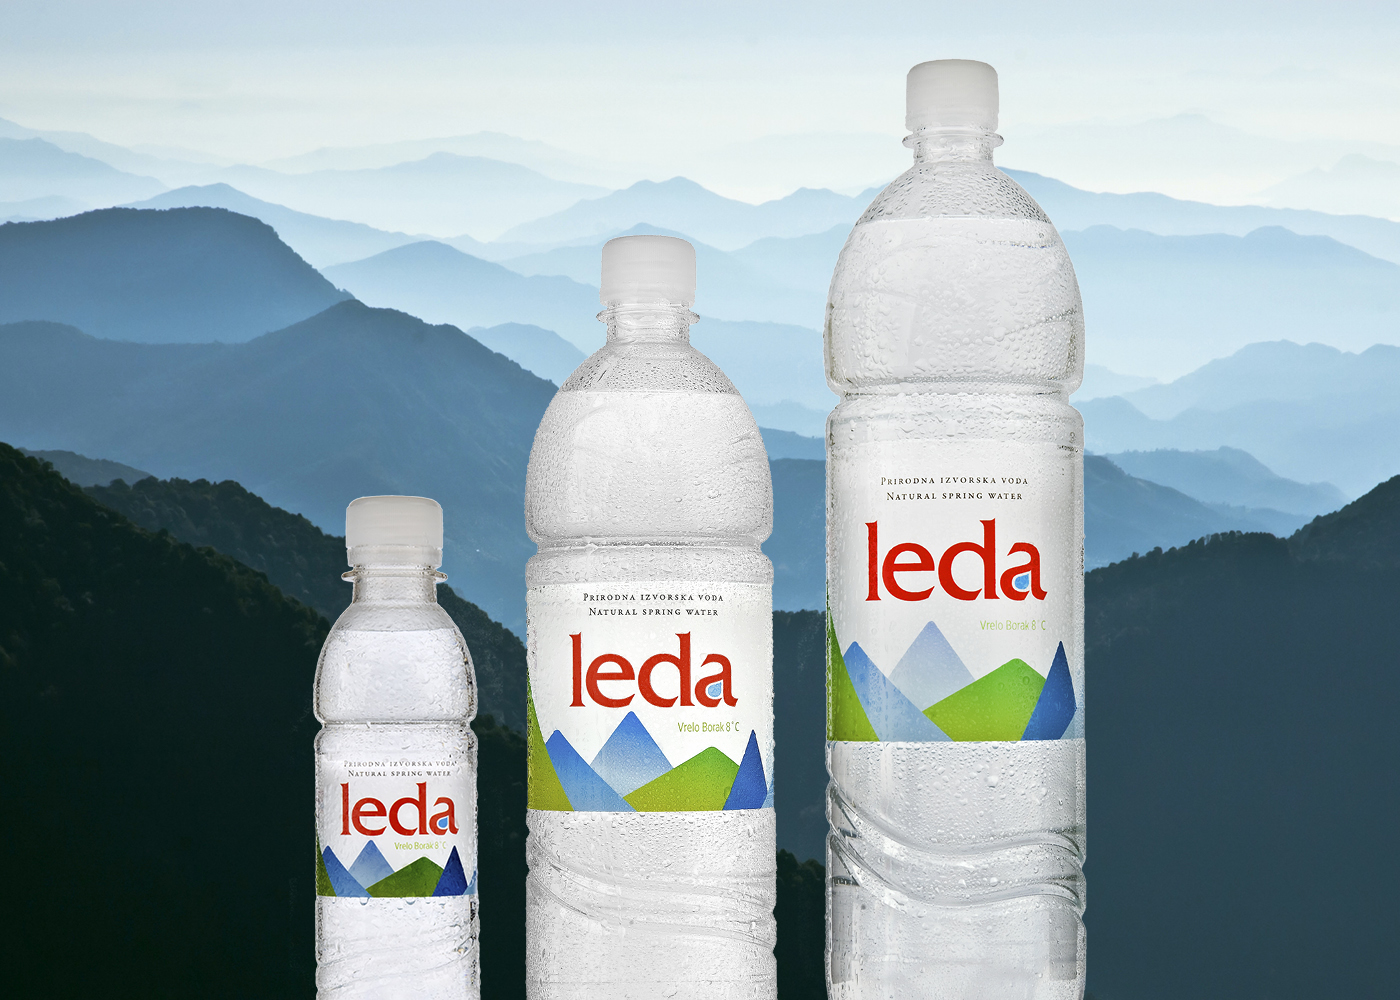 The visual identity of natural spring water